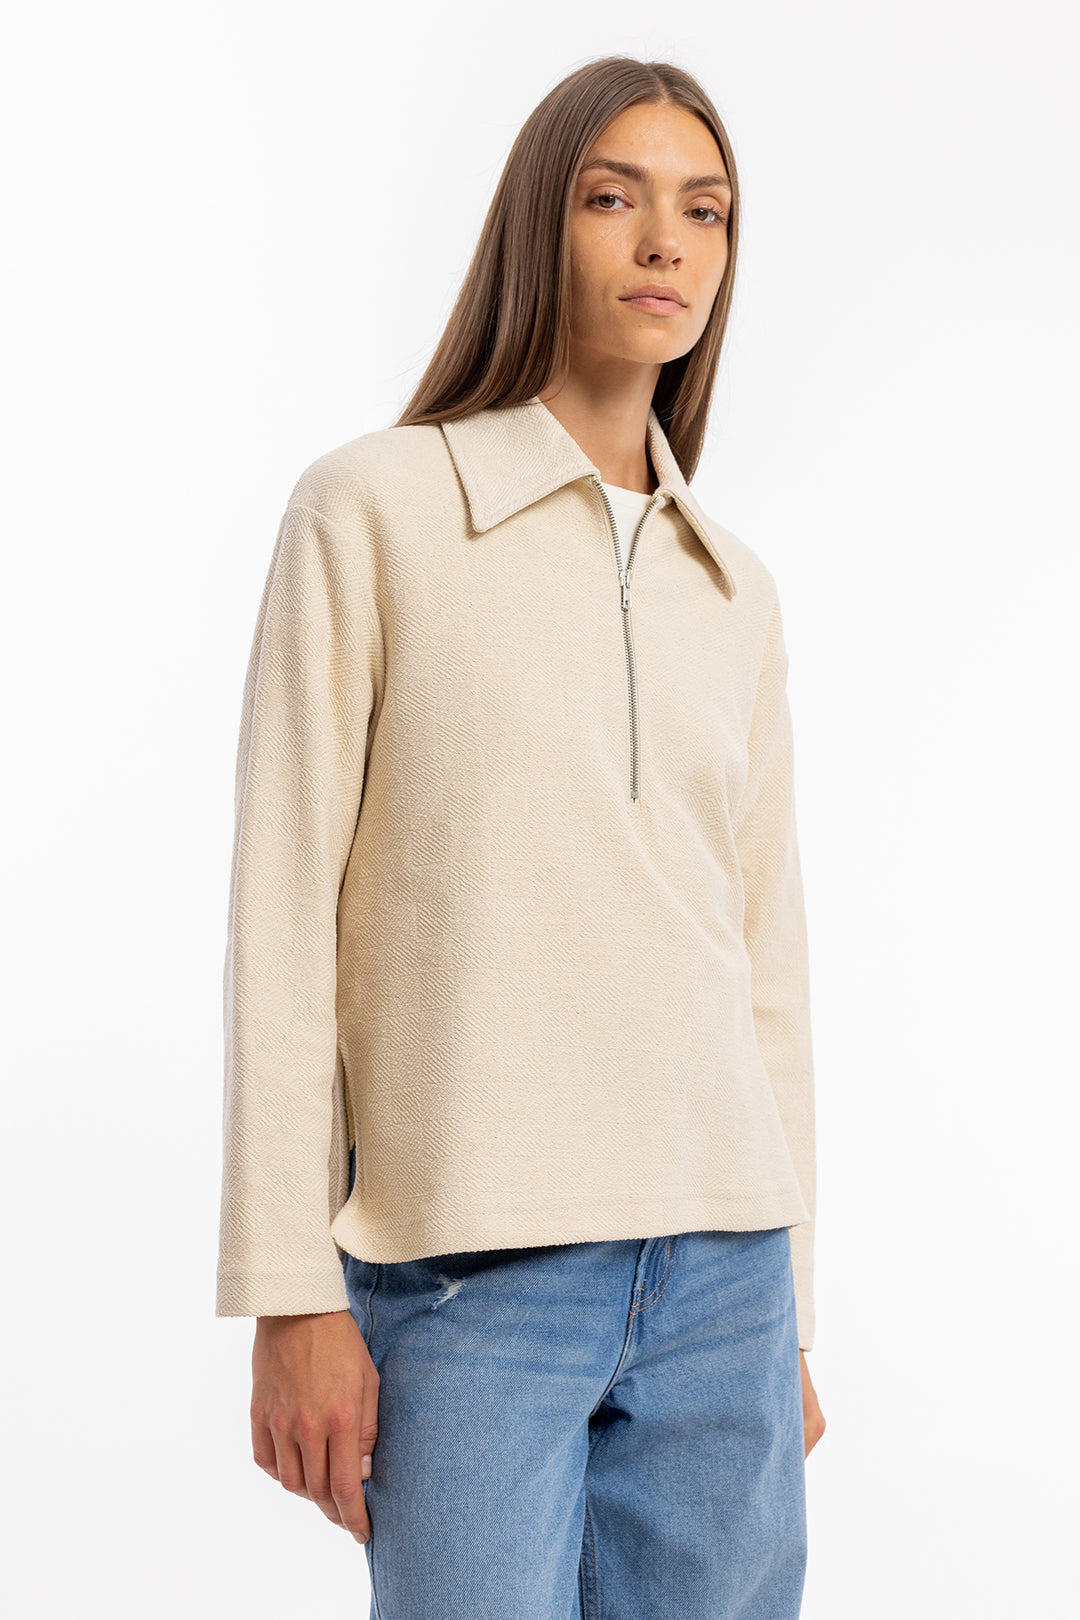 Beige polo zip sweater made of organic cotton from Rotholz